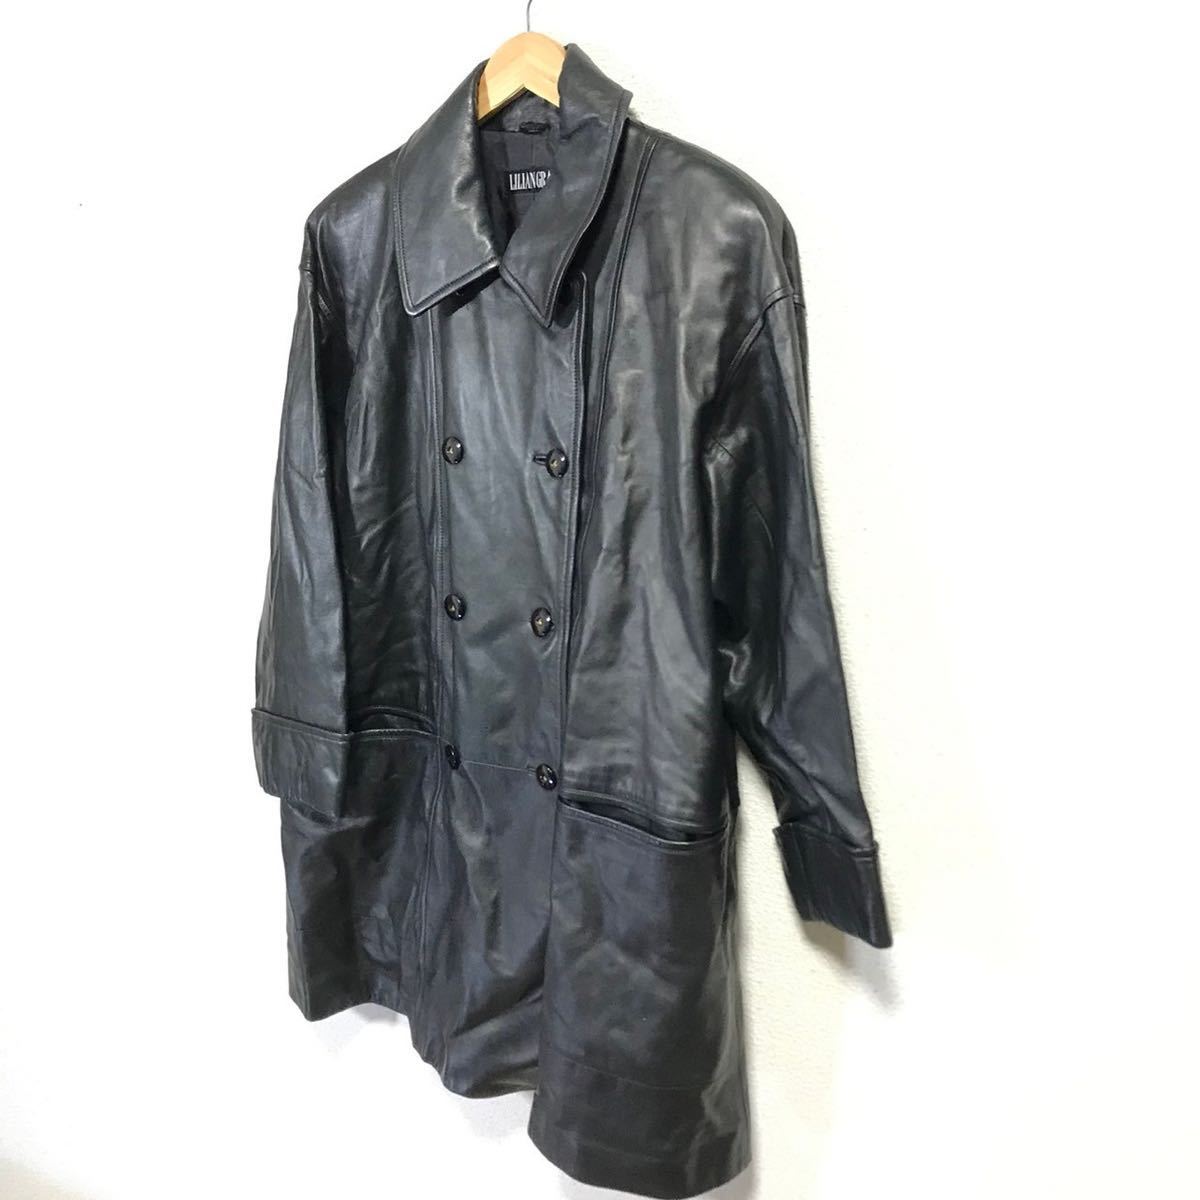 H5933dh made in Japan [LILIAN GRAY Lilian gray ] size 9 XL LL rank leather coat long leather jacket black lady's leather pea coat 